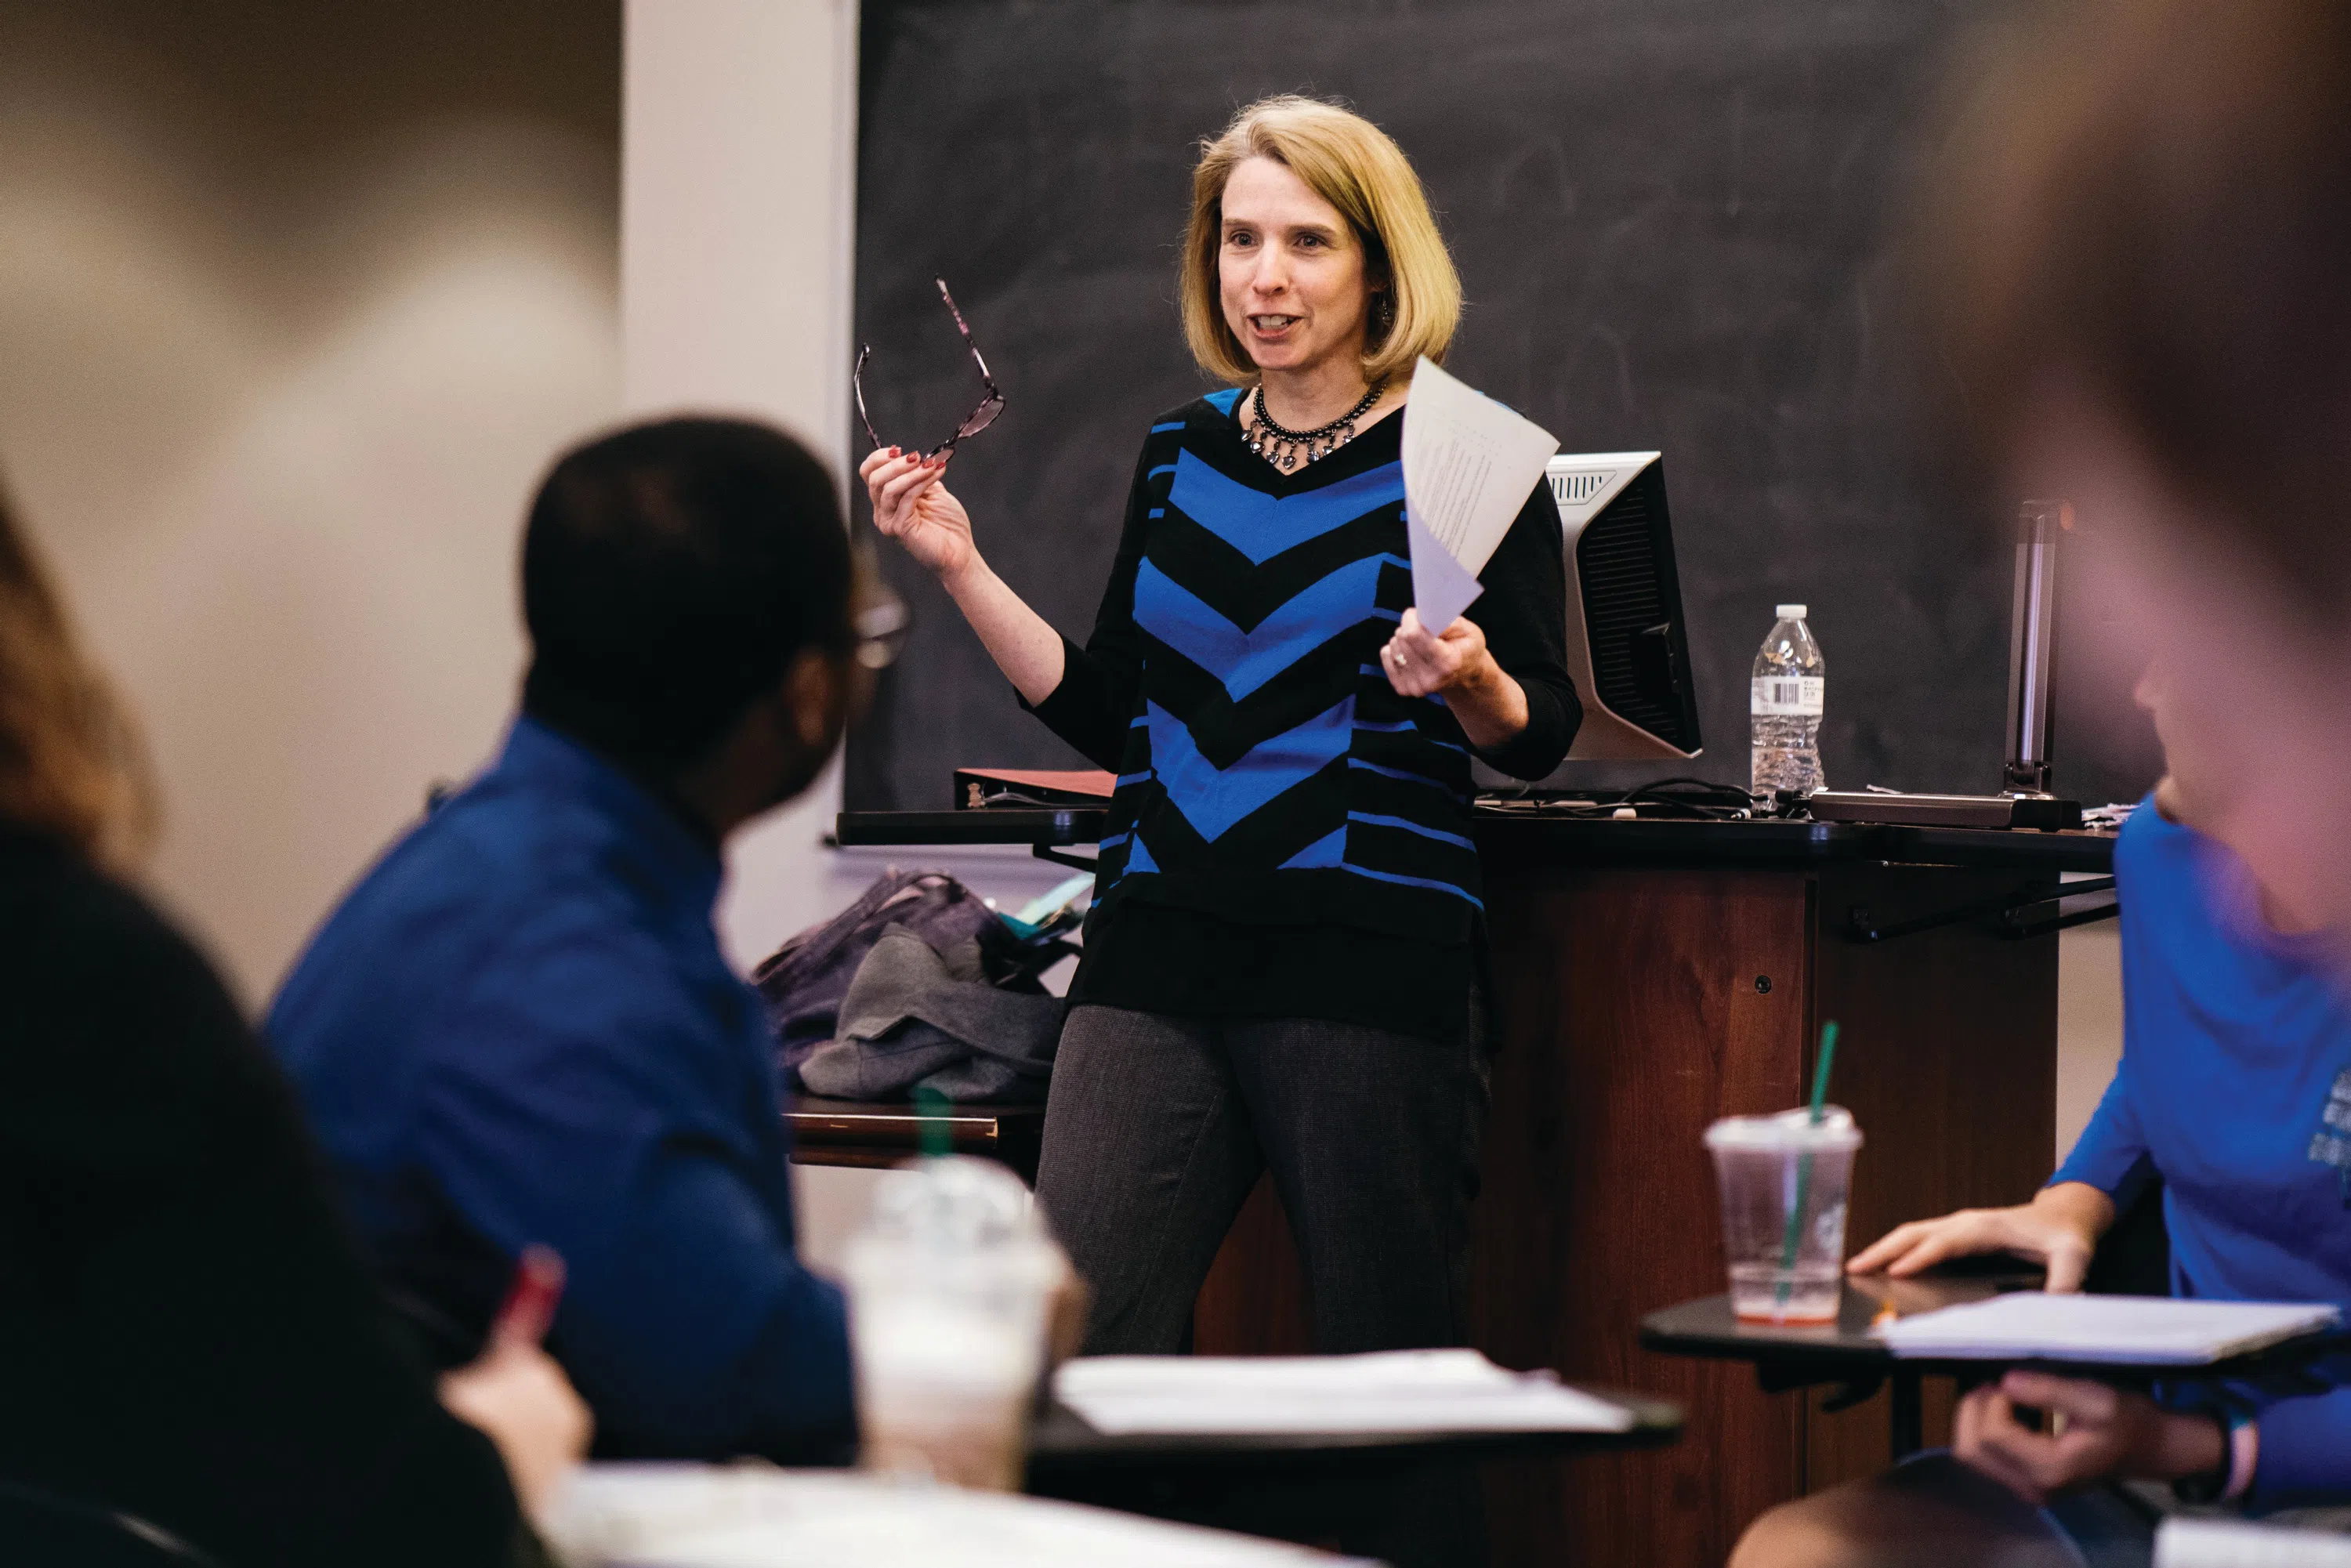 A faculty member stands among students during a classroom discussion.